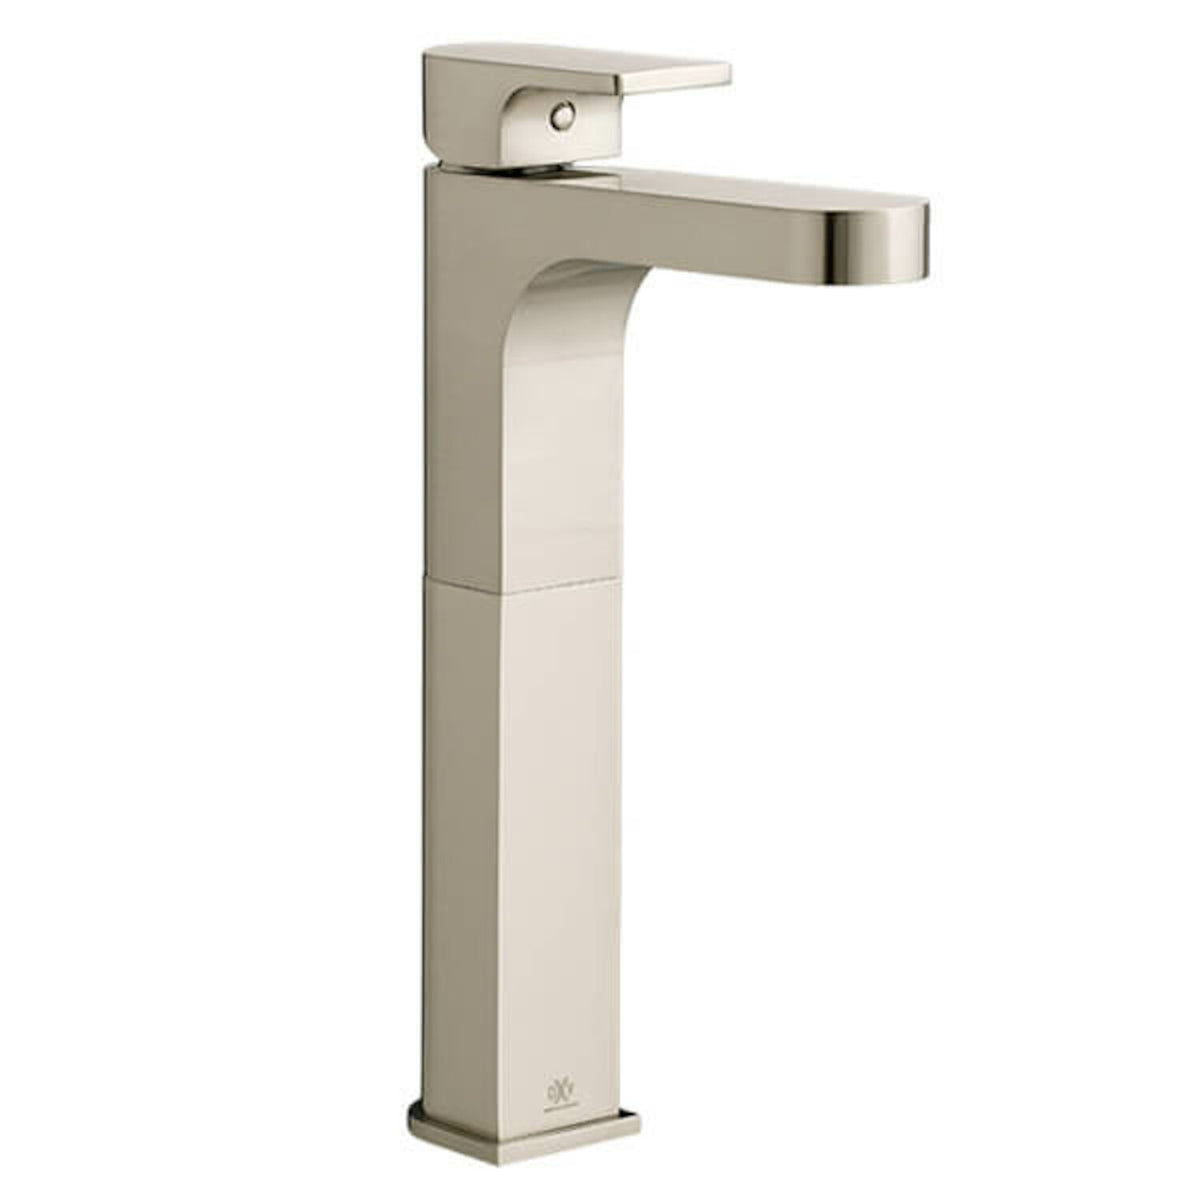 EQUILITY SINGLE LEVER BATHROOM FAUCET